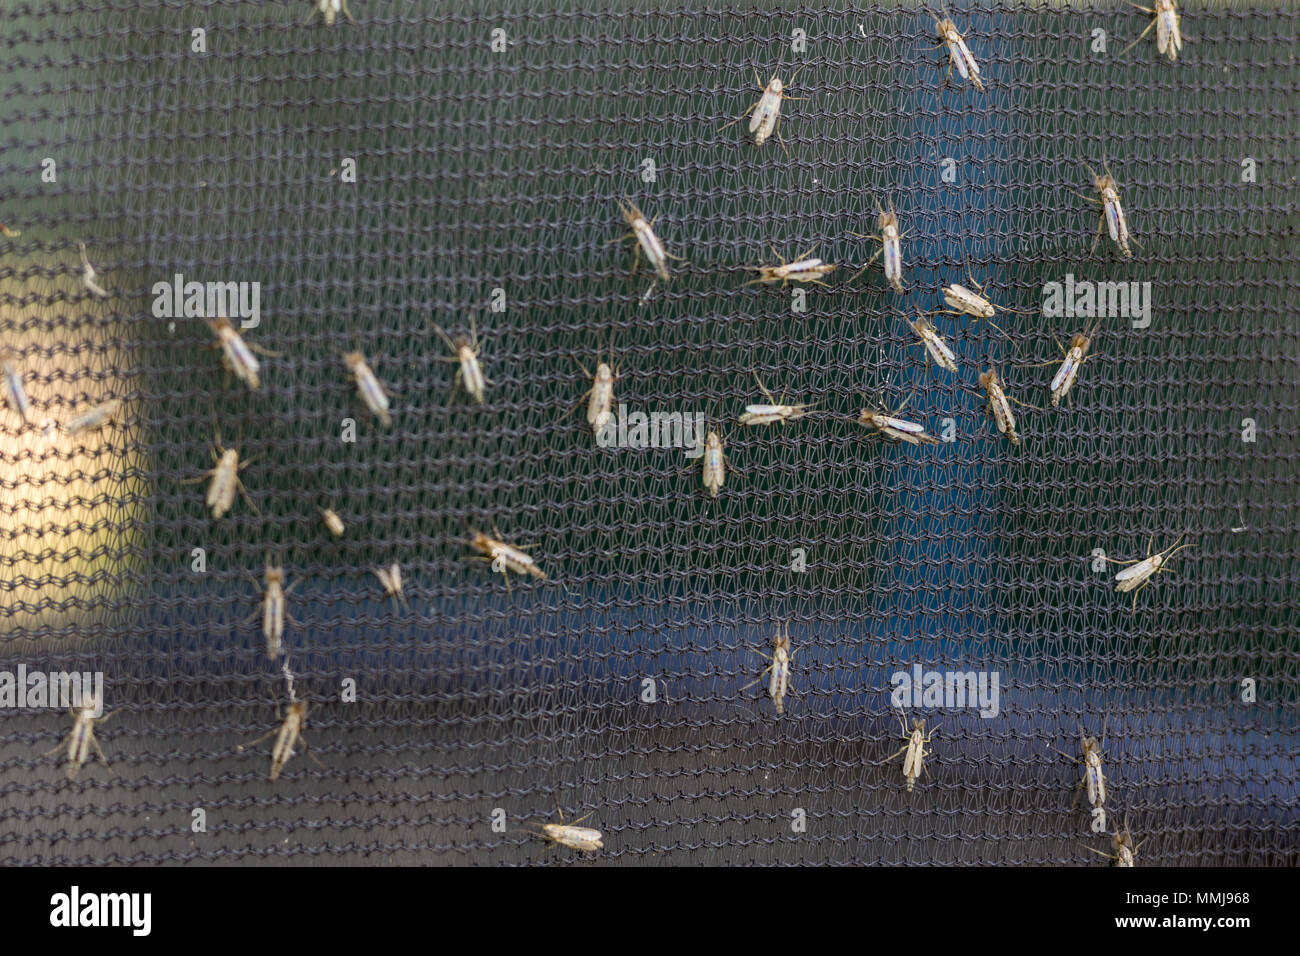 Lot of midges or mosquiotos sitting on balck protective insect screen. Chironomus plumosus Stock Photo